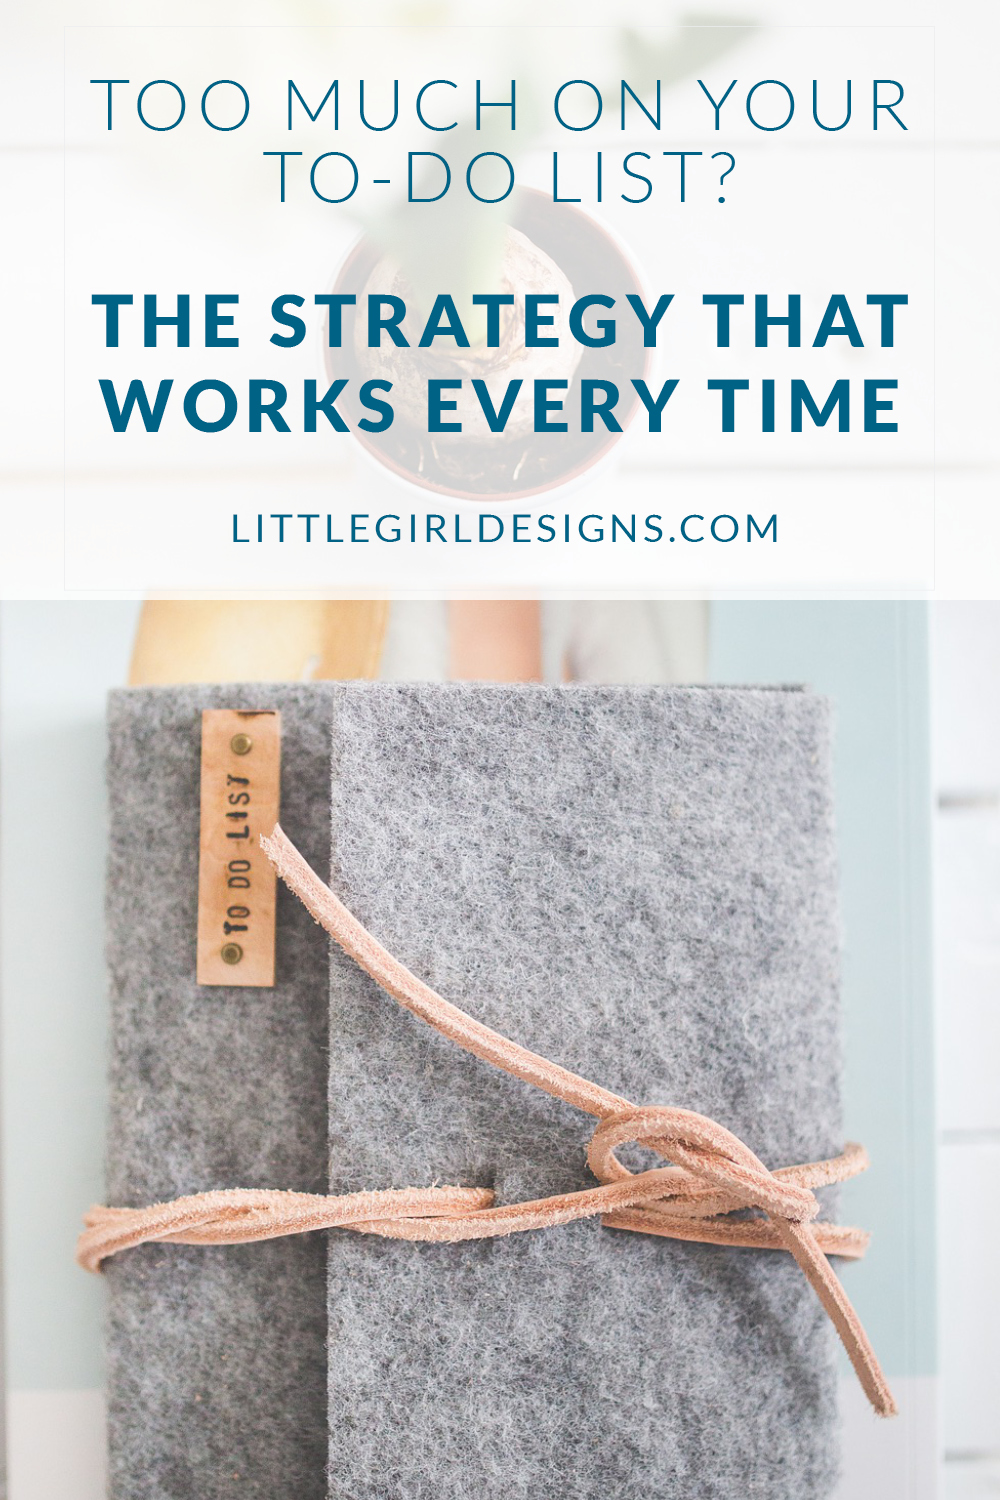 The Creative's To Do List - Here's a strategy that has helped me move from that frustrating place of having too much to do (or way too many ideas) to actually moving forward and DOING them. It's so simple, but it really works! @ littlegirldesigns.com